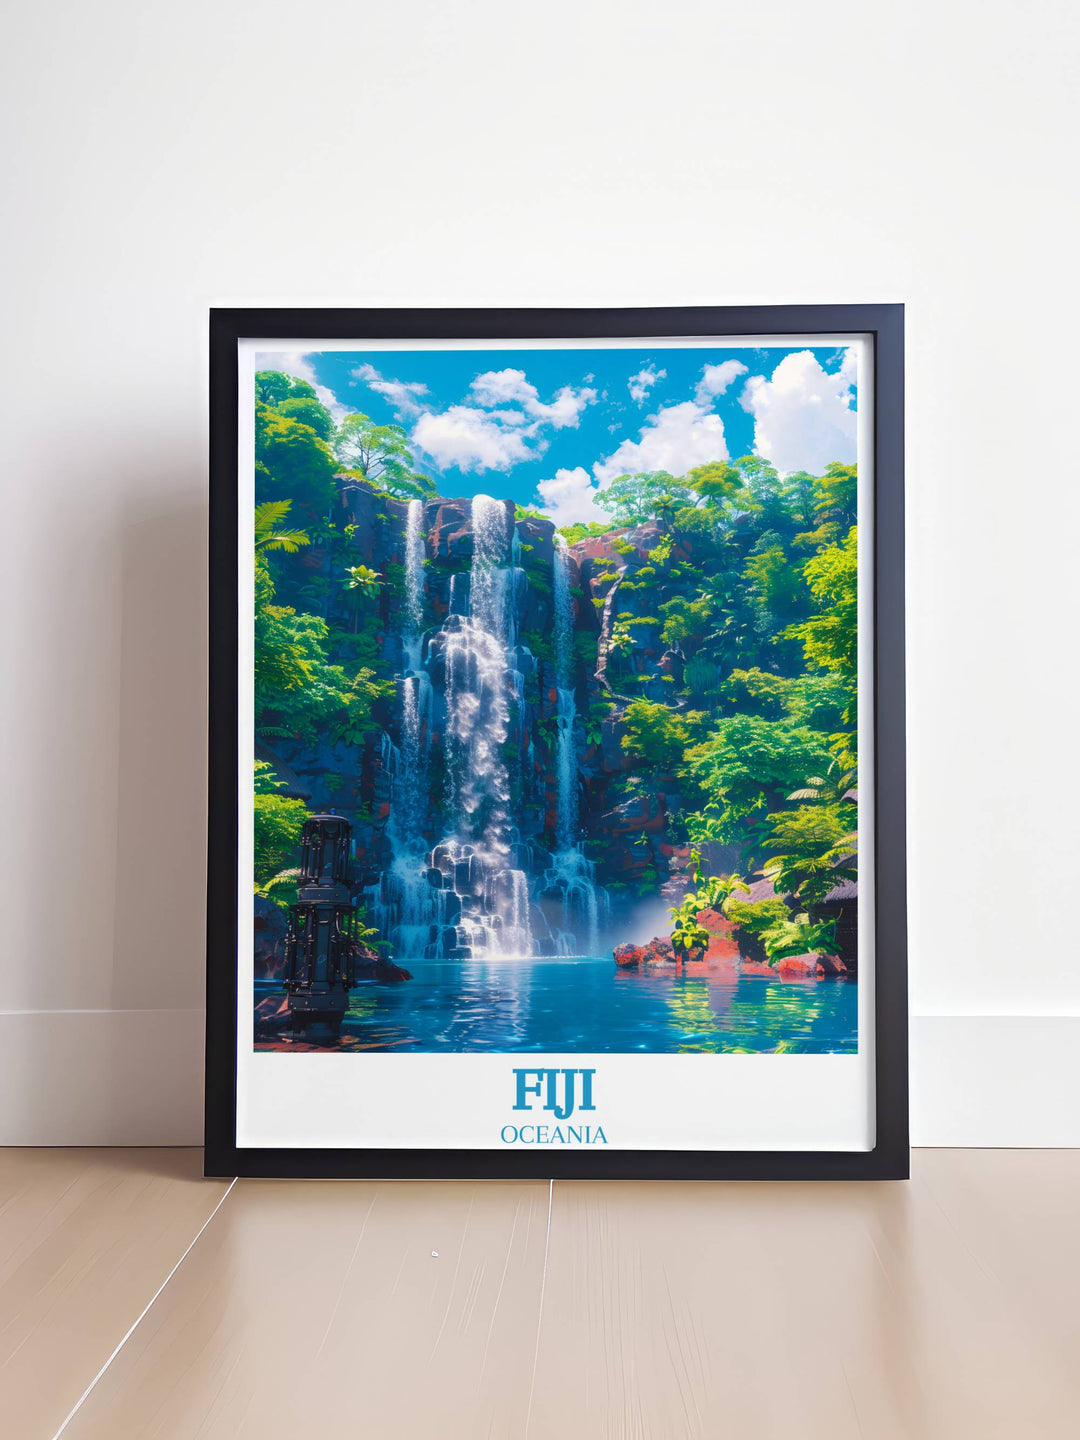 Elegant Fiji Wall Hanging featuring the peaceful Tavoro Falls offering a slice of the South Pacifics natural splendor to art lovers and Hawaii enthusiasts alike